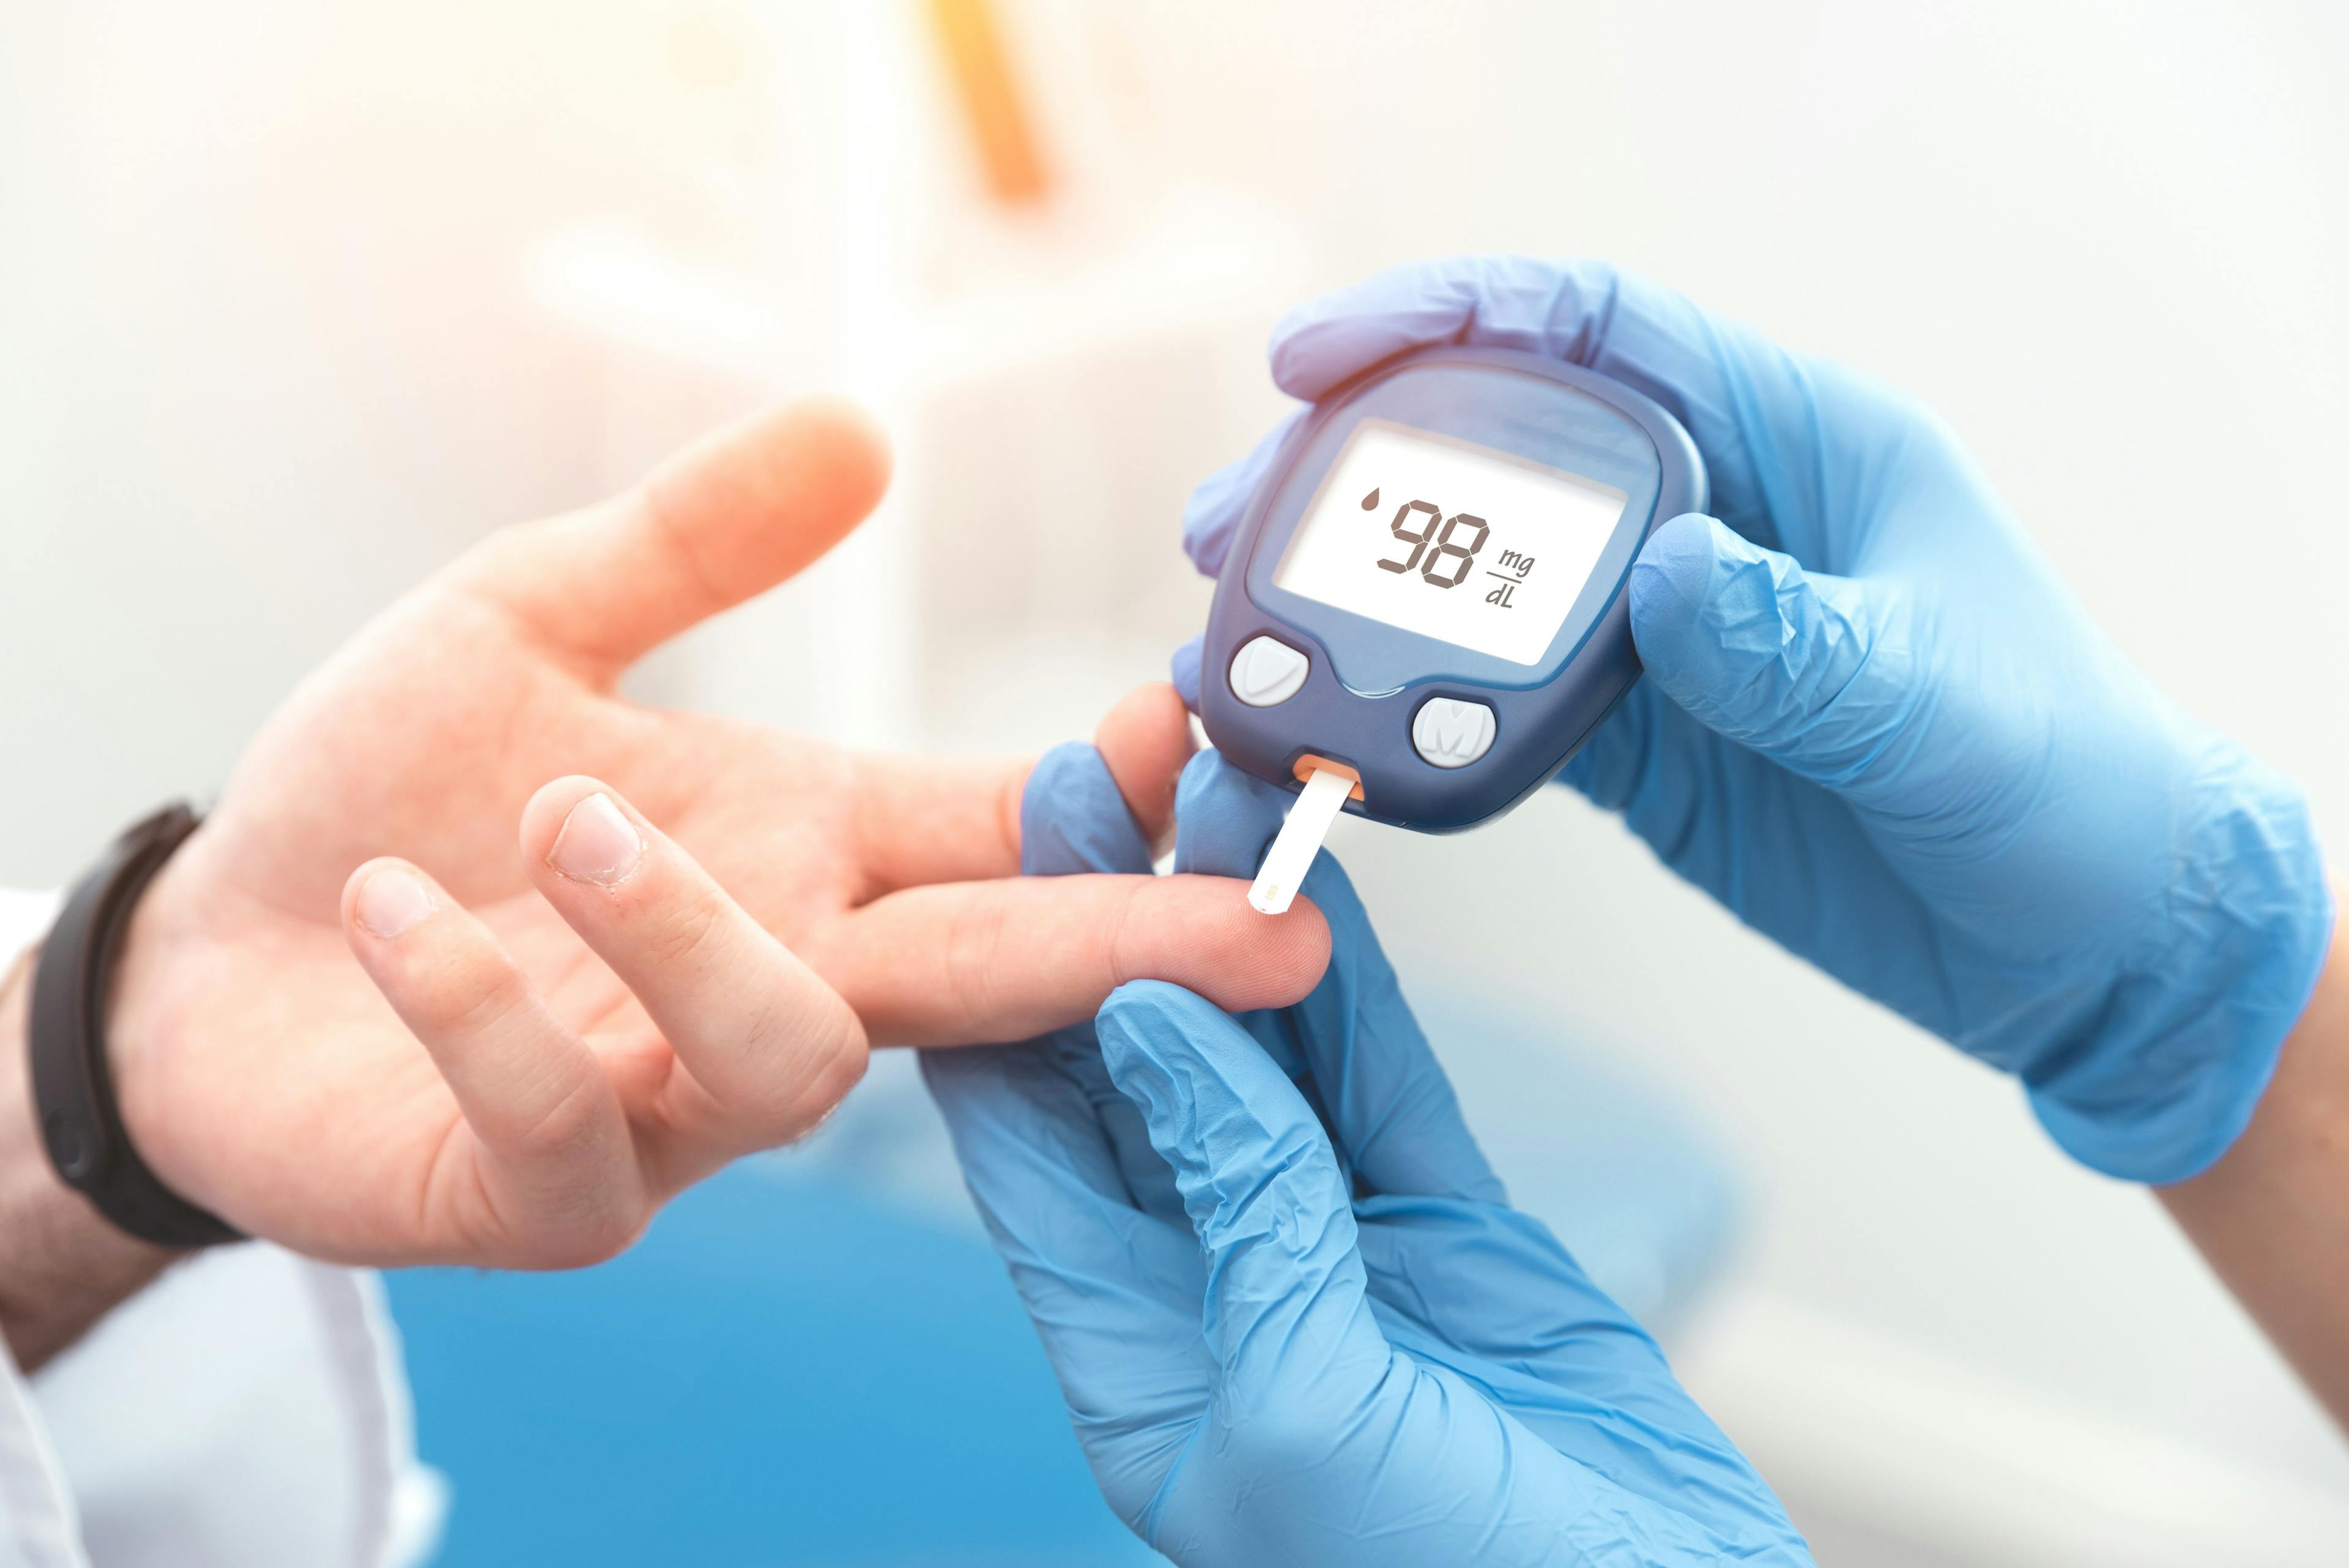 Statin Initiation Increases Diabetes Risk in Patients With Rheumatoid Arthritis 